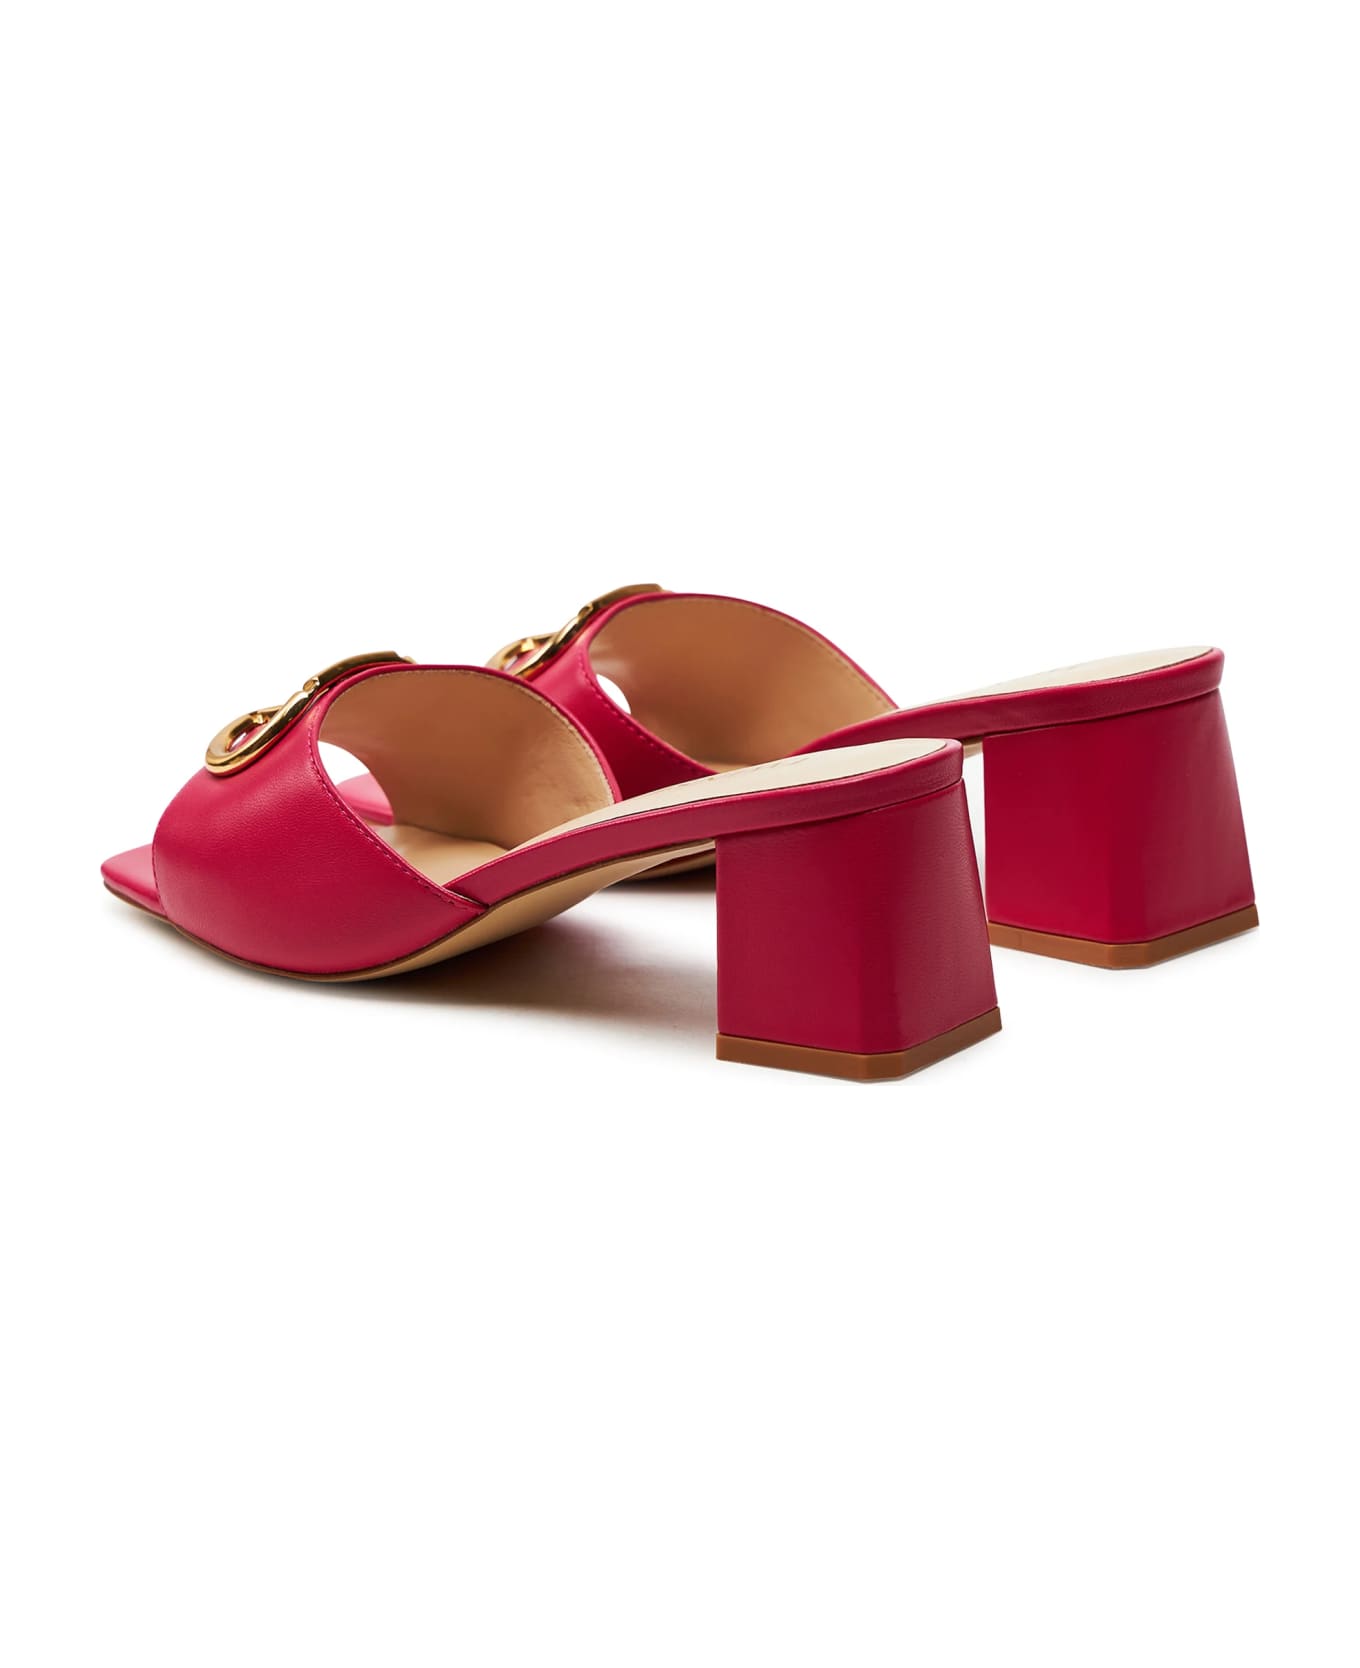 TwinSet Leather Sandals With Oval T - Bright rose